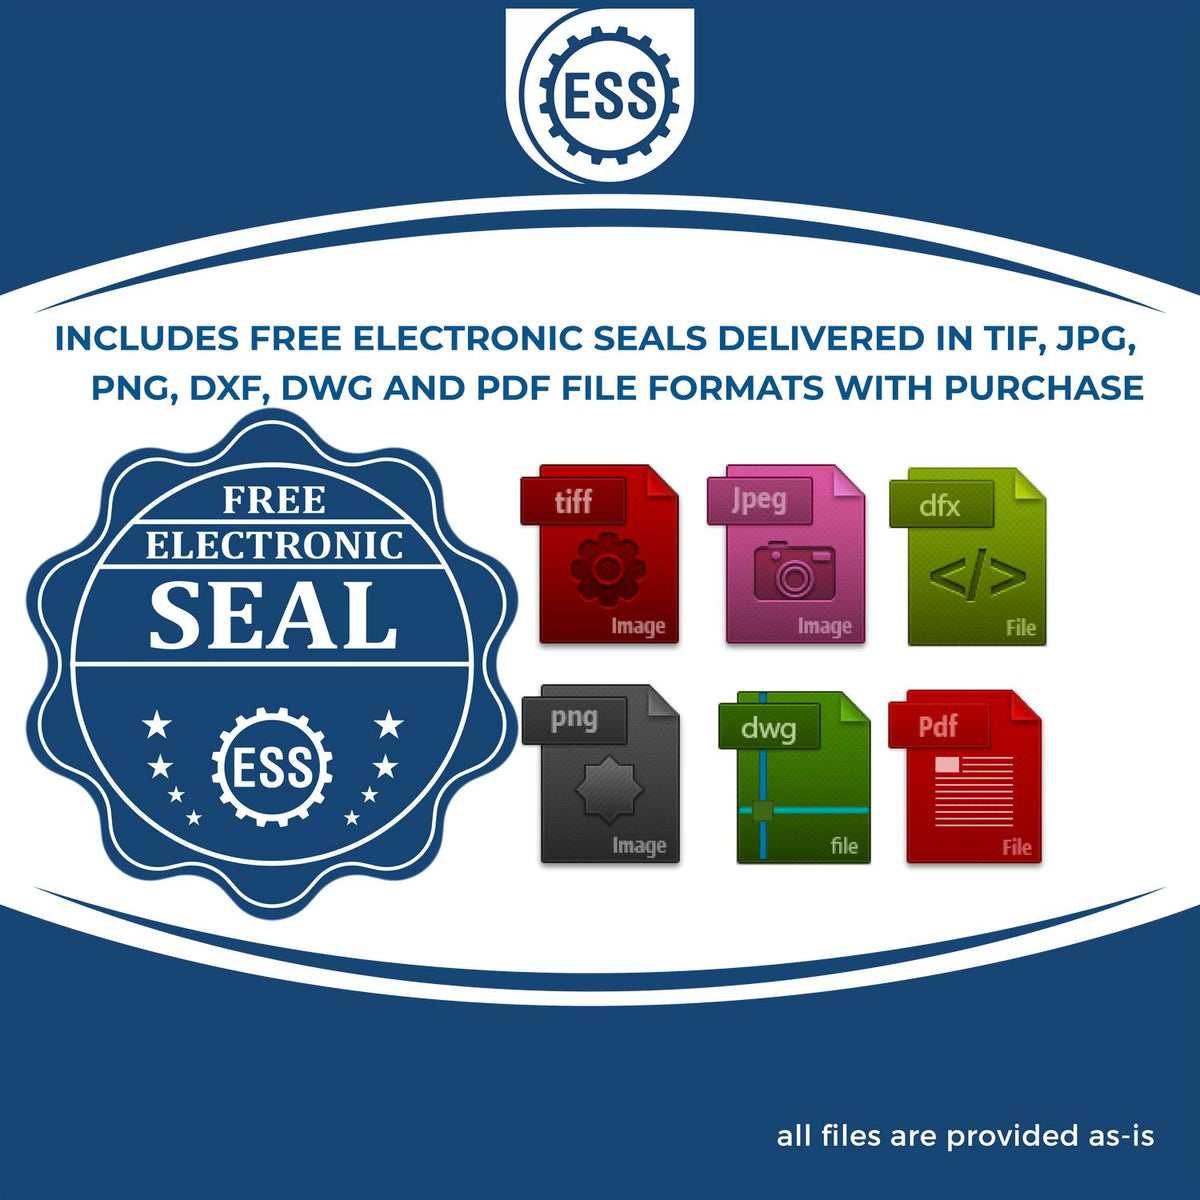 An infographic for the free electronic seal for the Self-Inking West Virginia Landscape Architect Stamp illustrating the different file type icons such as DXF, DWG, TIF, JPG and PNG.